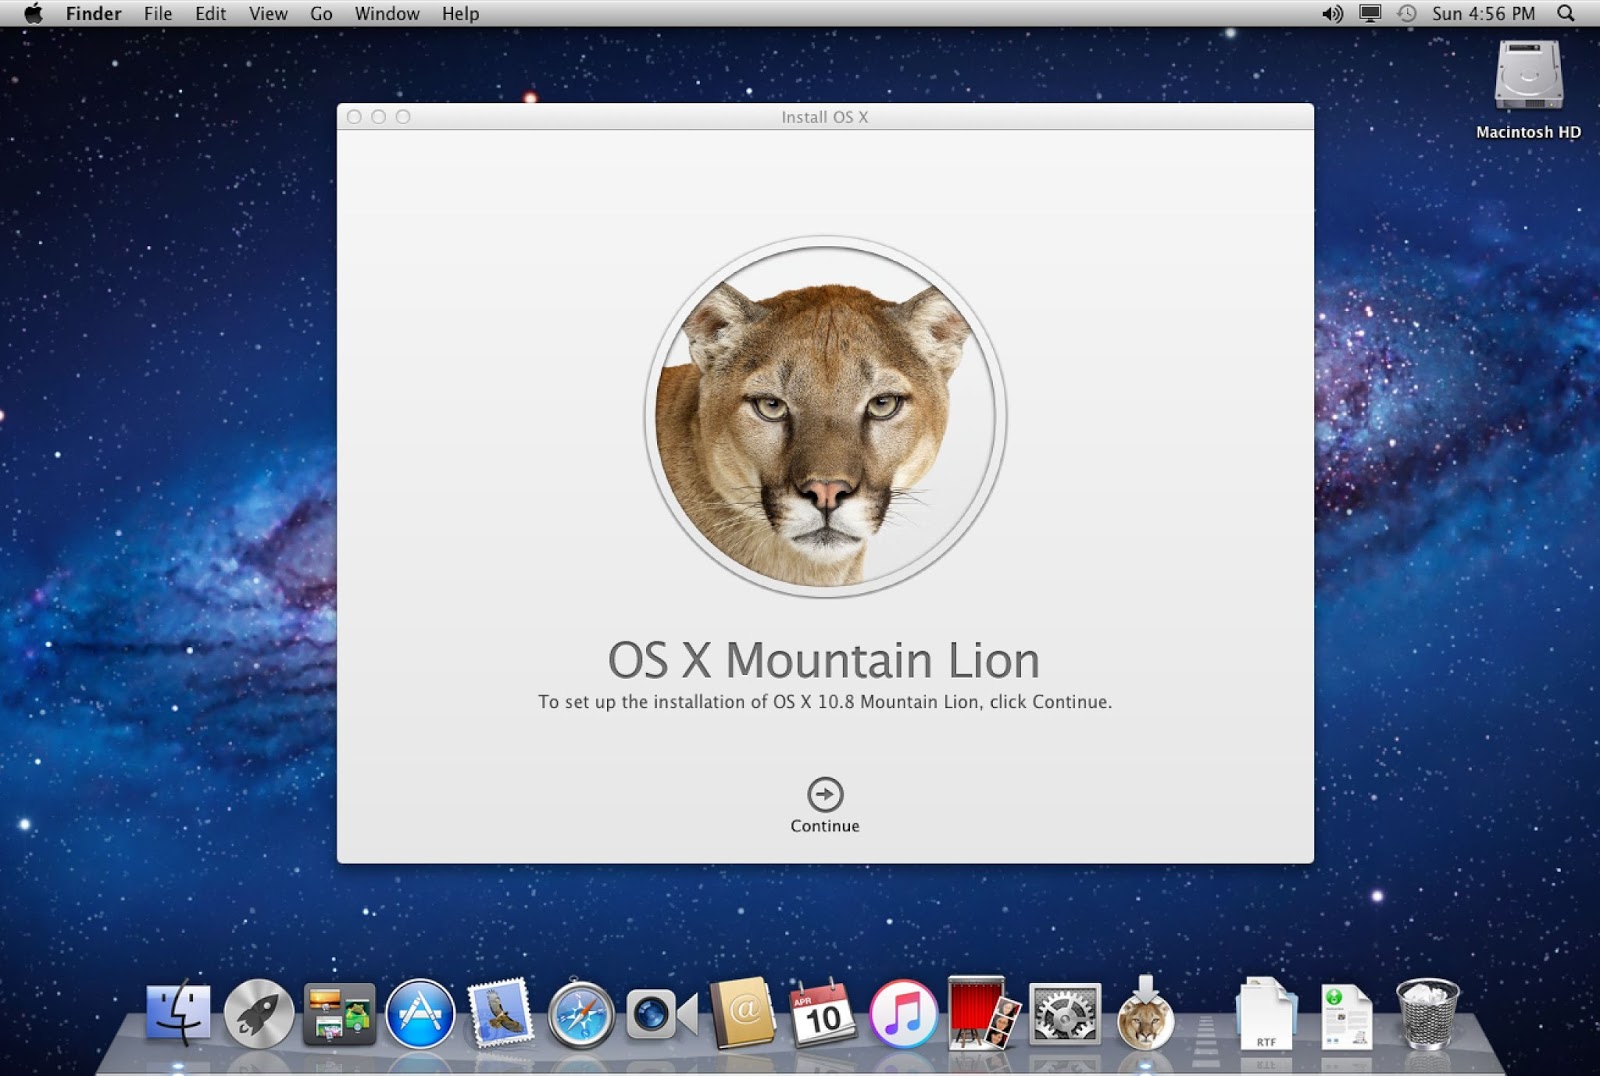 software update for mac 10.7.5